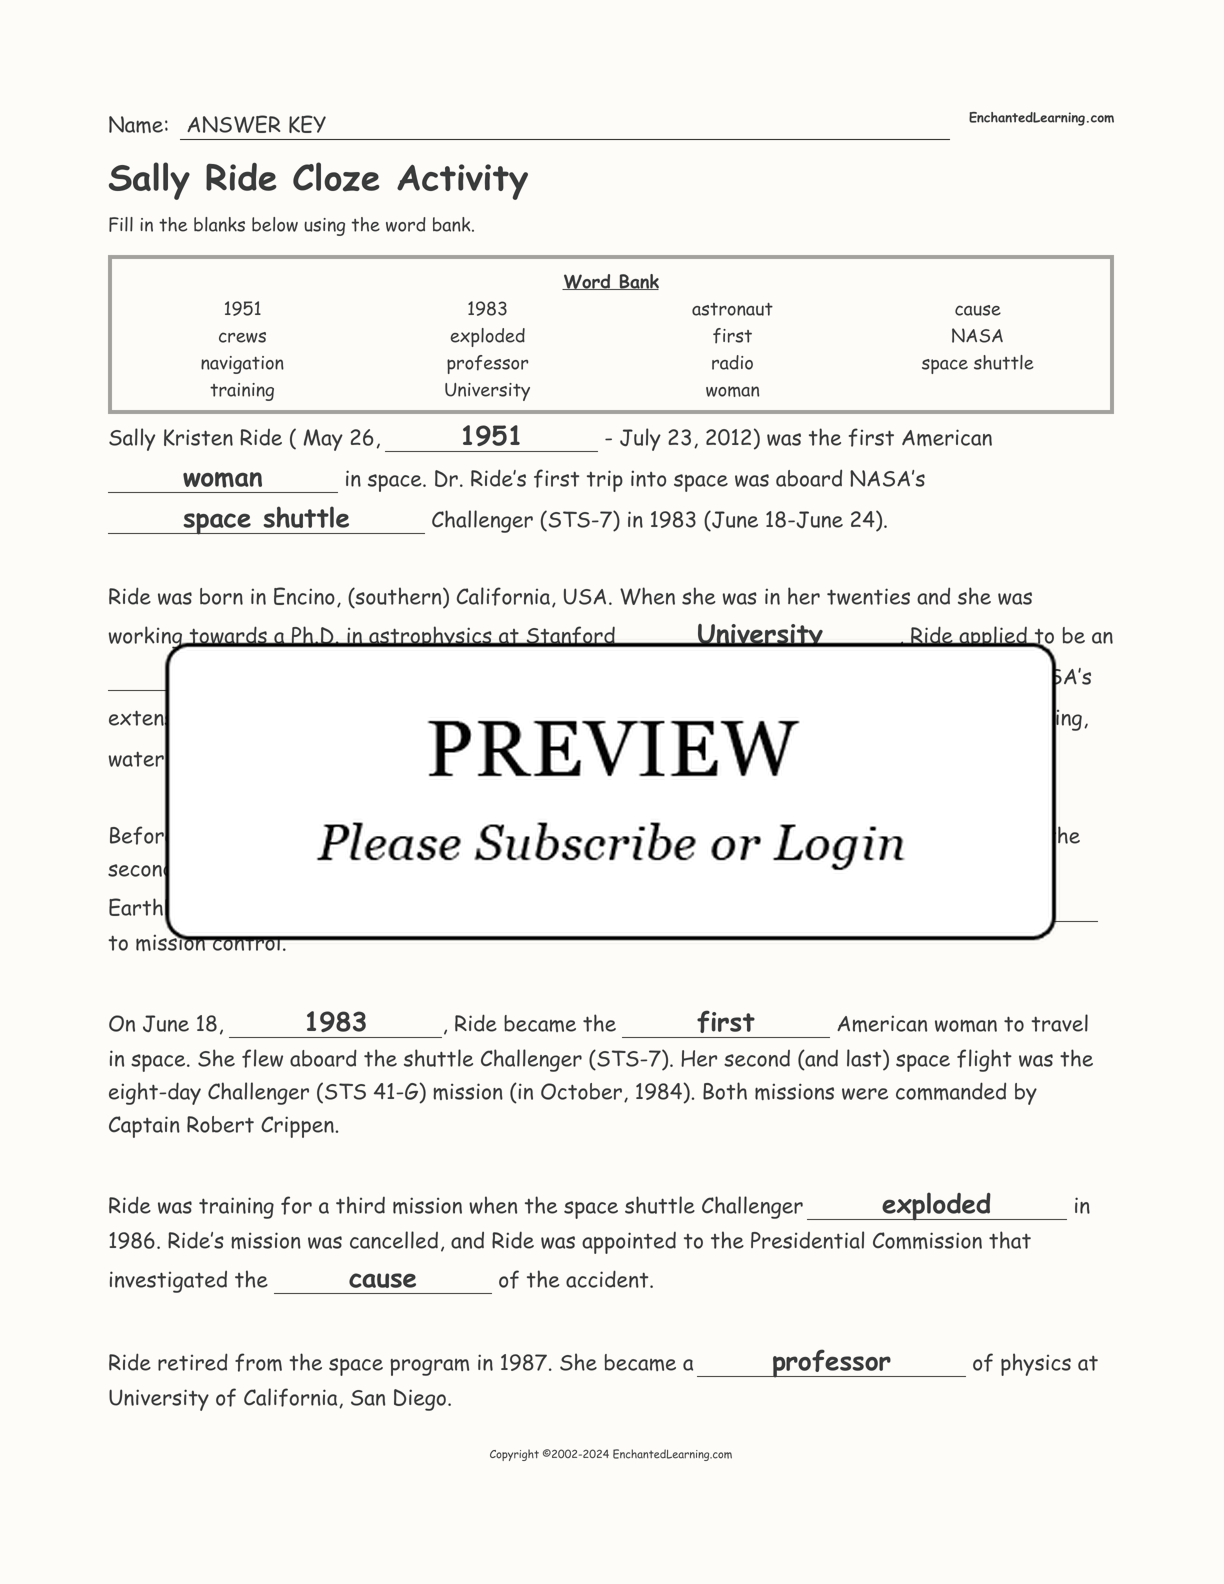 Sally Ride Cloze Activity interactive worksheet page 2